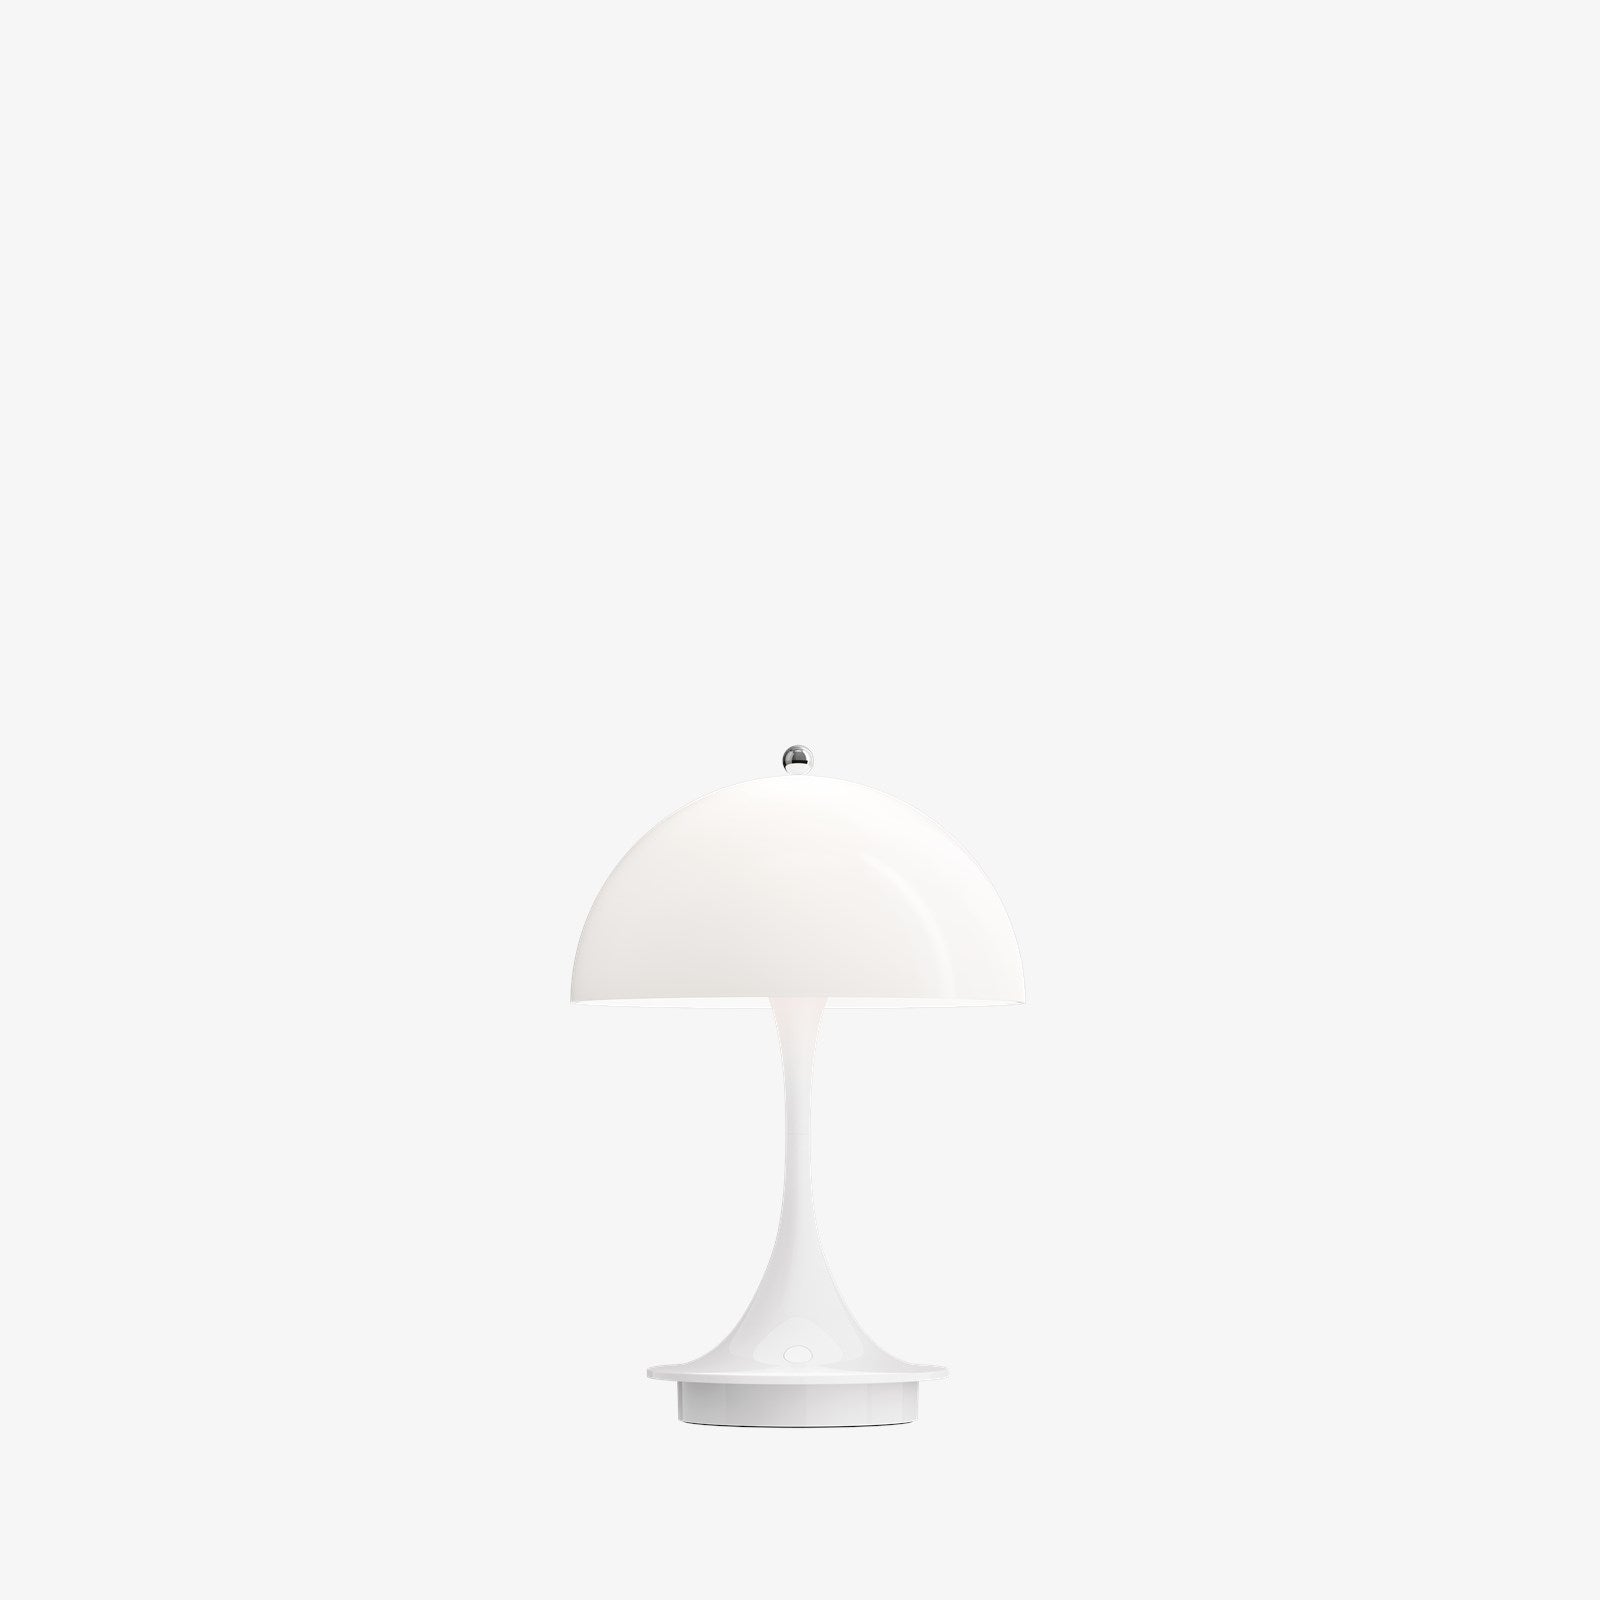 The versatile Panthella Portable by Louis Poulsen is the smallest edition of Verner Panton’s popular Table lamp from 1971. This scaled-down version of the original Panthella Table lamp can be used anywhere as it does not depend on a power supply.